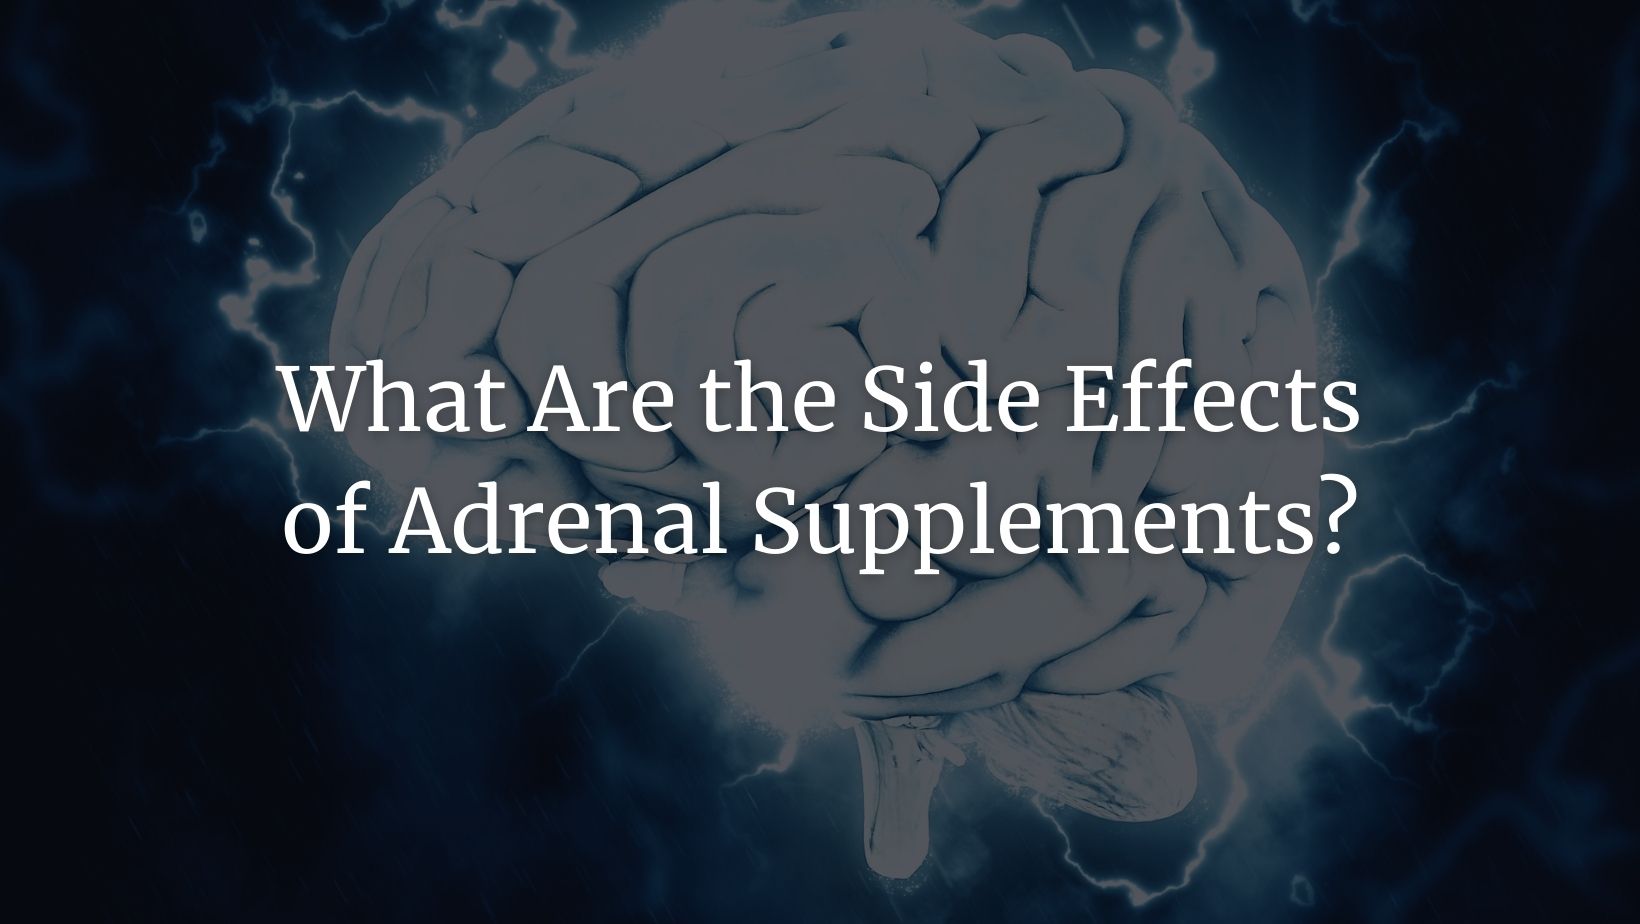 Adrenal supplements featured image